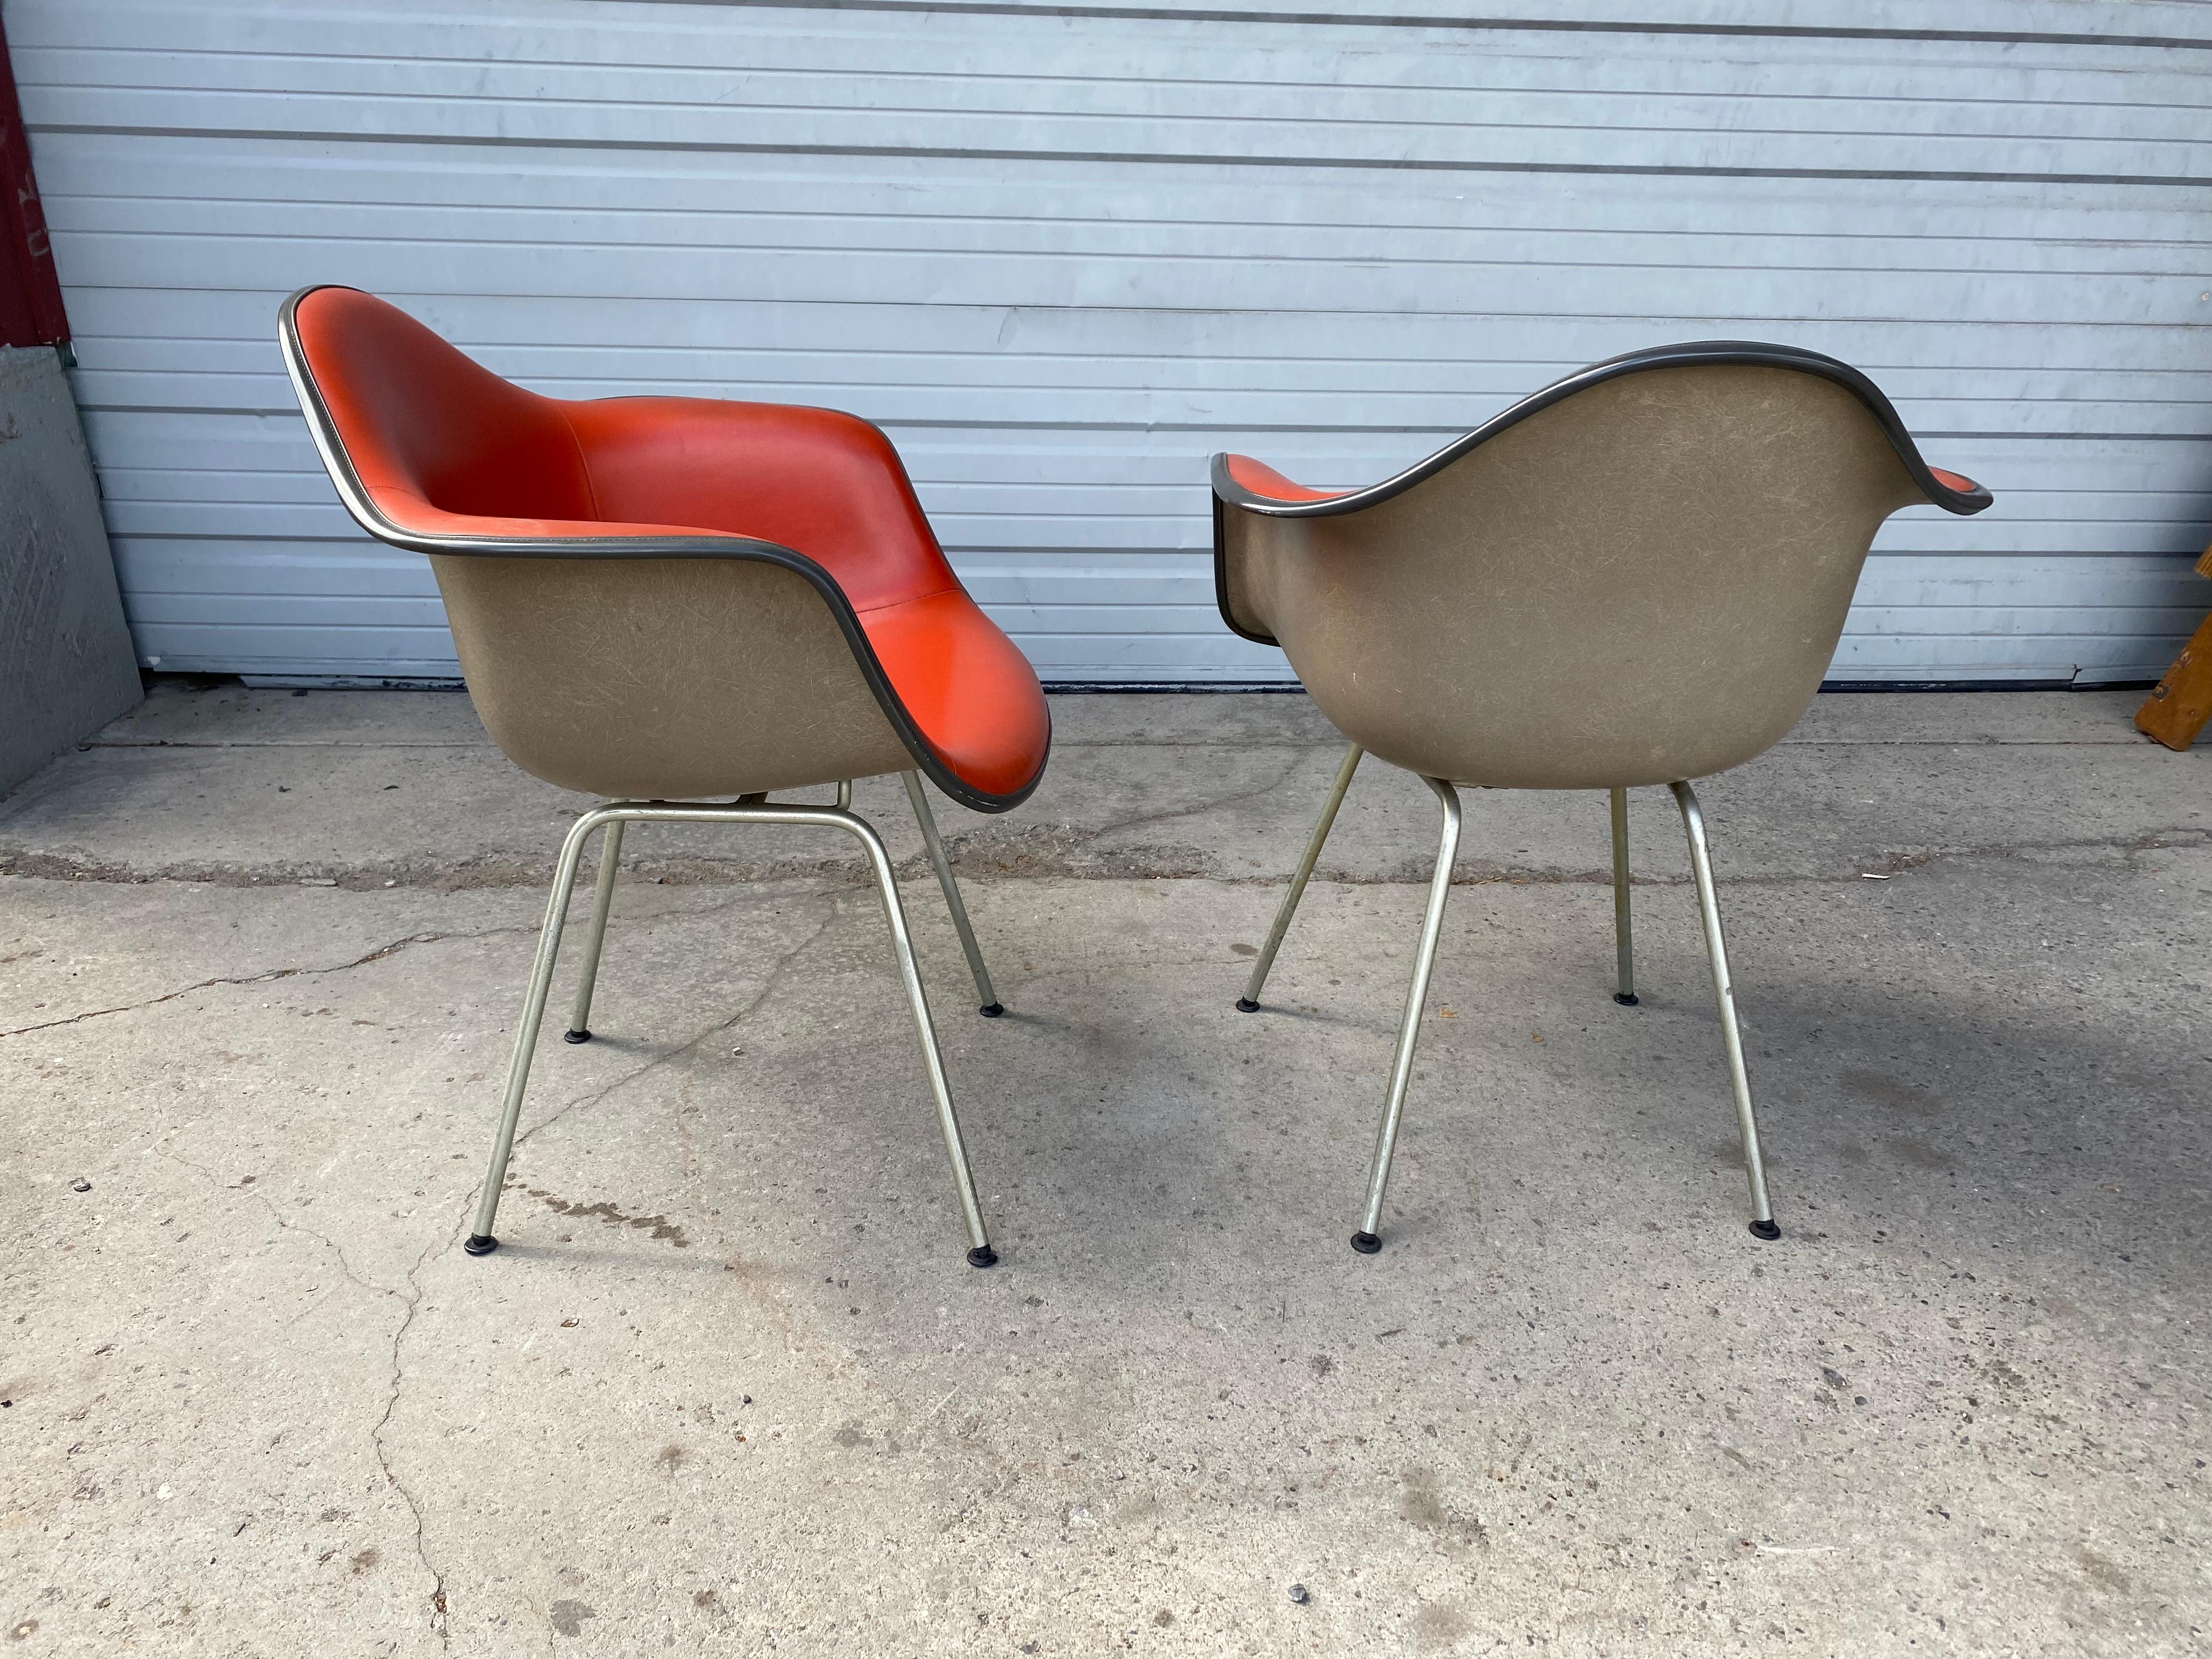 Classic pair of Mid-Century Modern padded arm shell chairs,Designed by Charles and Ray Eames, for Herman Miller. Beautiful two-tone, chairs are in really nice original condition. Extremely comfortable. Retain all 8 feet glides...